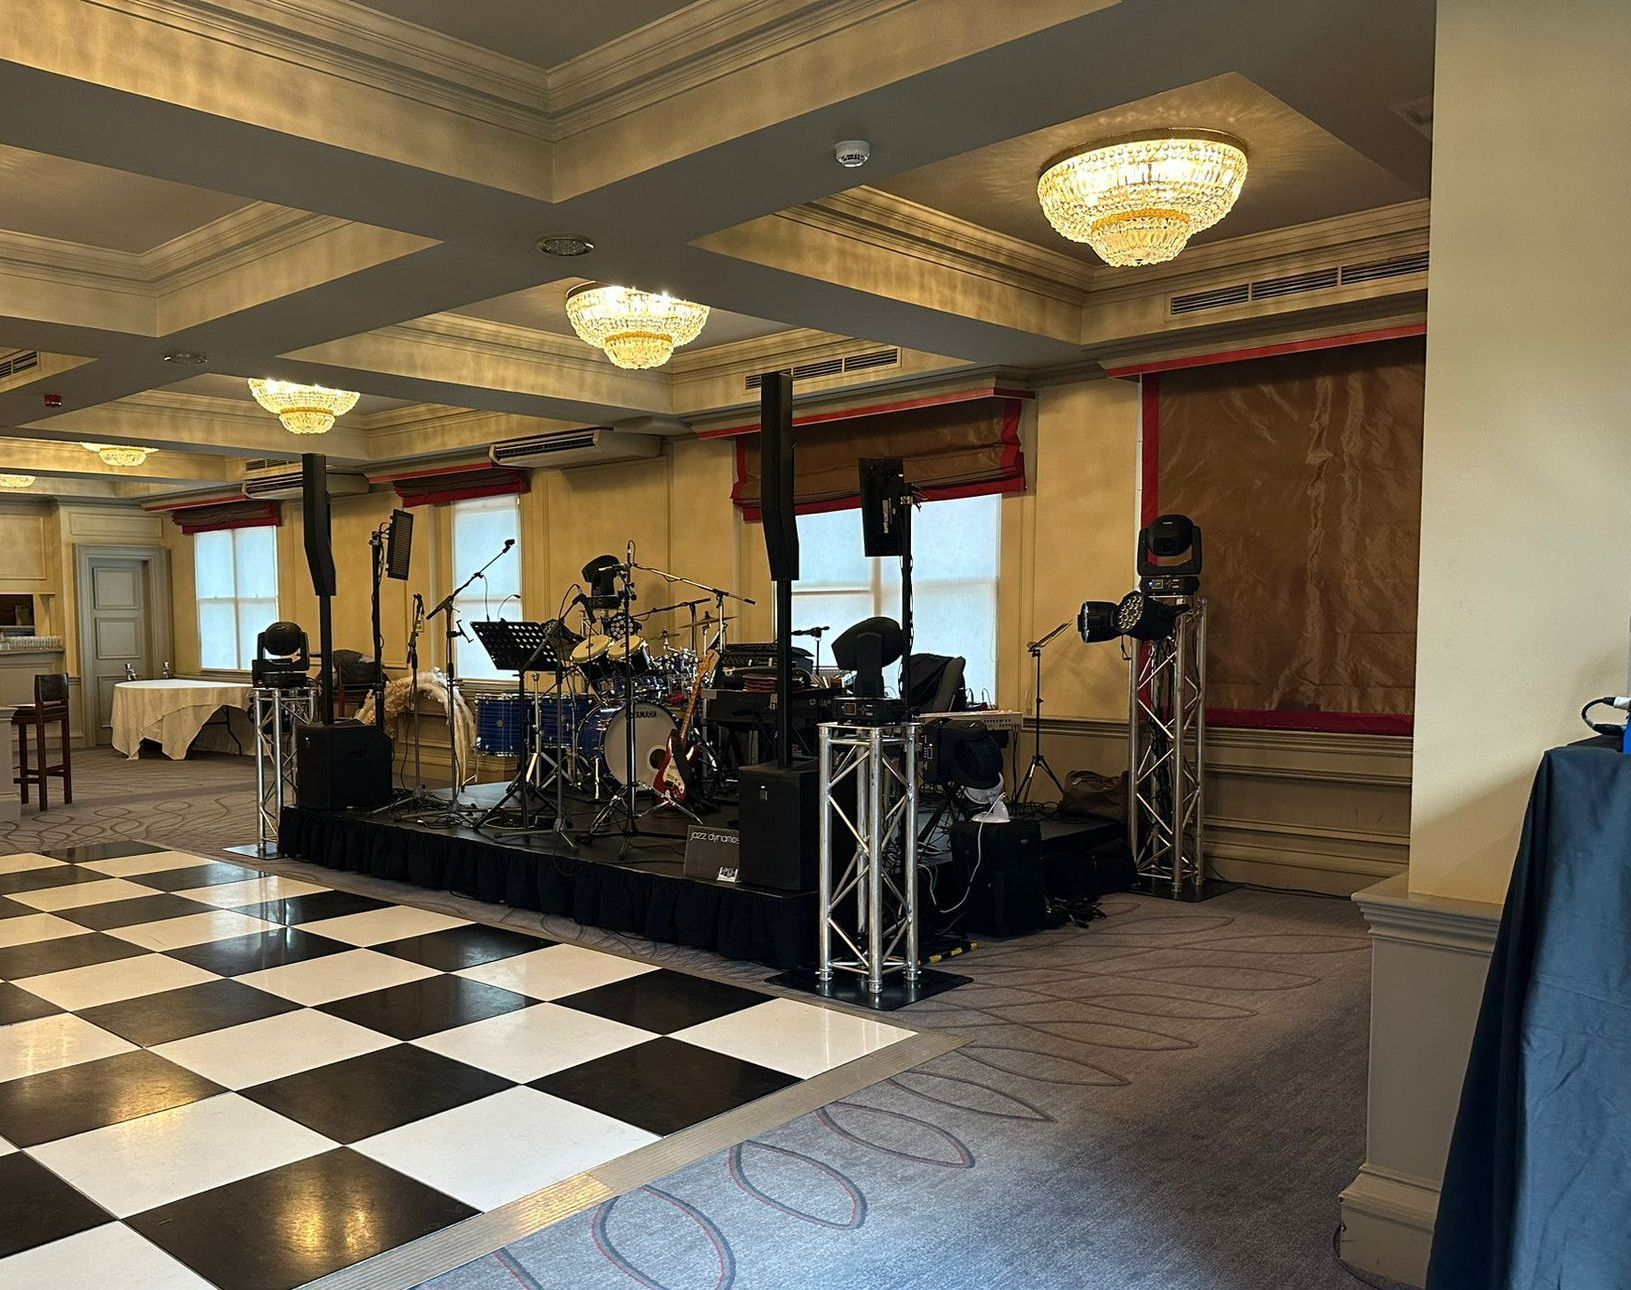 Modular wedding stage set up in an indoor venue with lights and a pa system